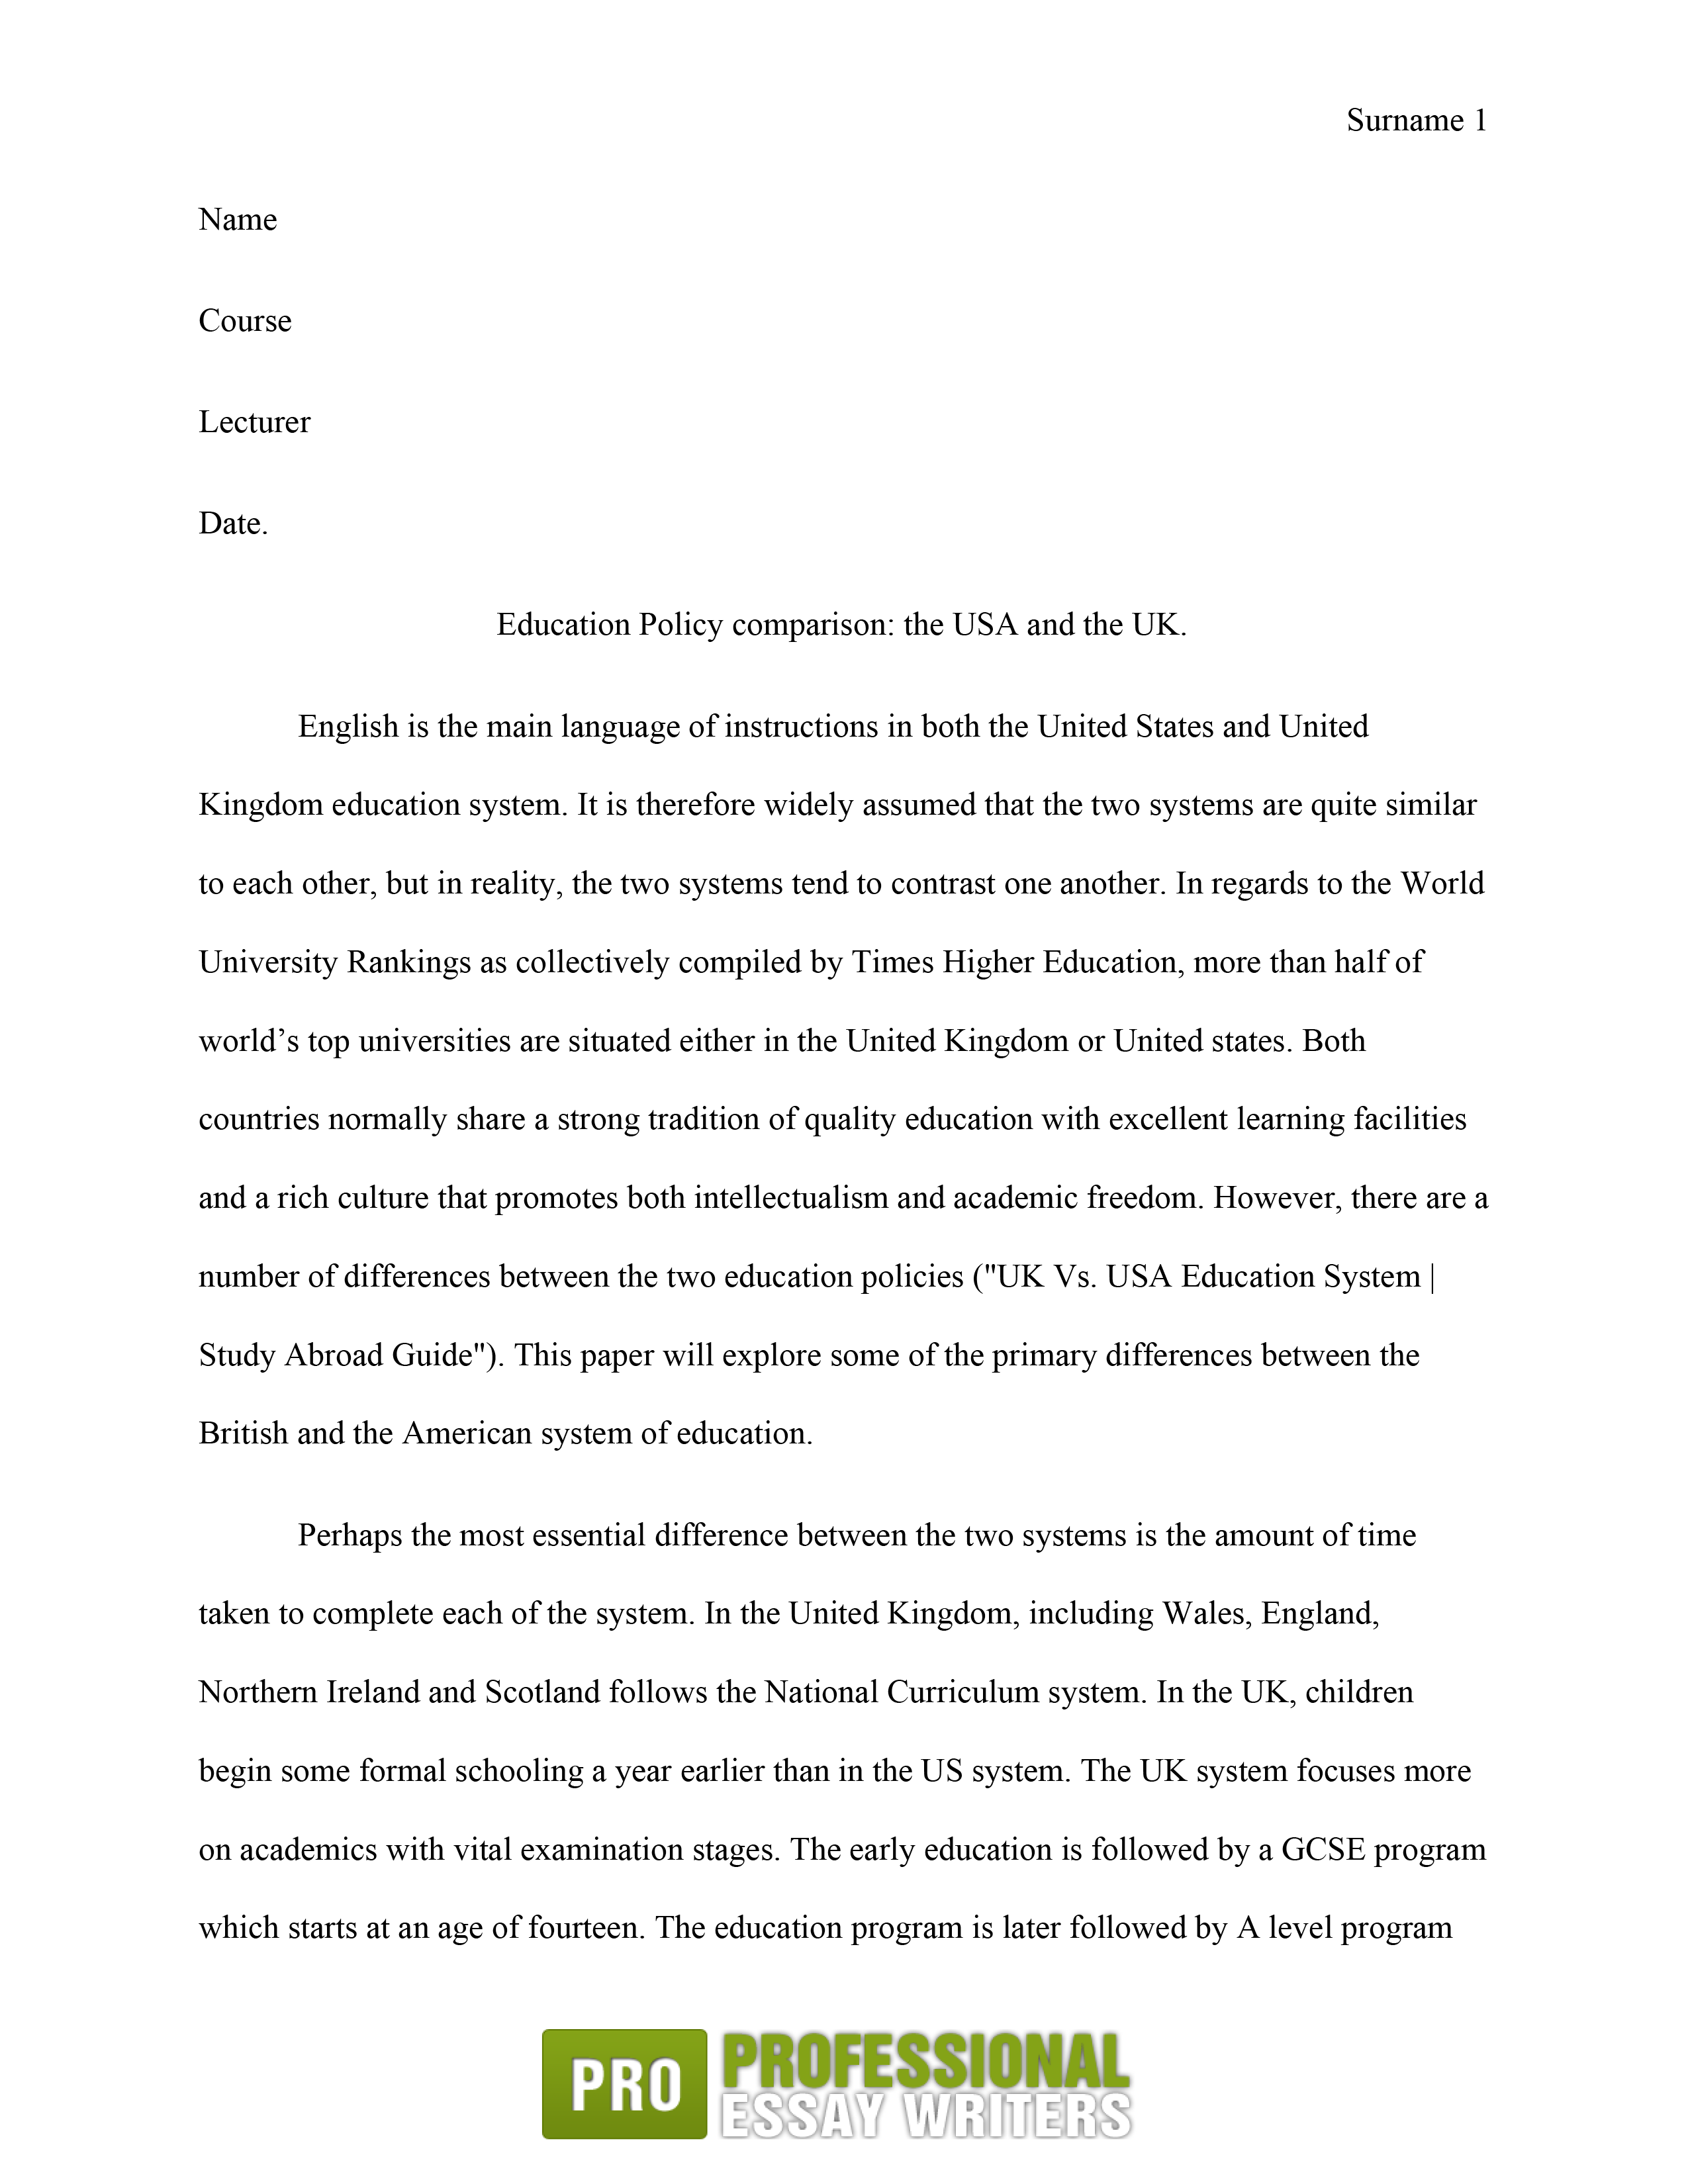 Good thesis for compare and contrast essay